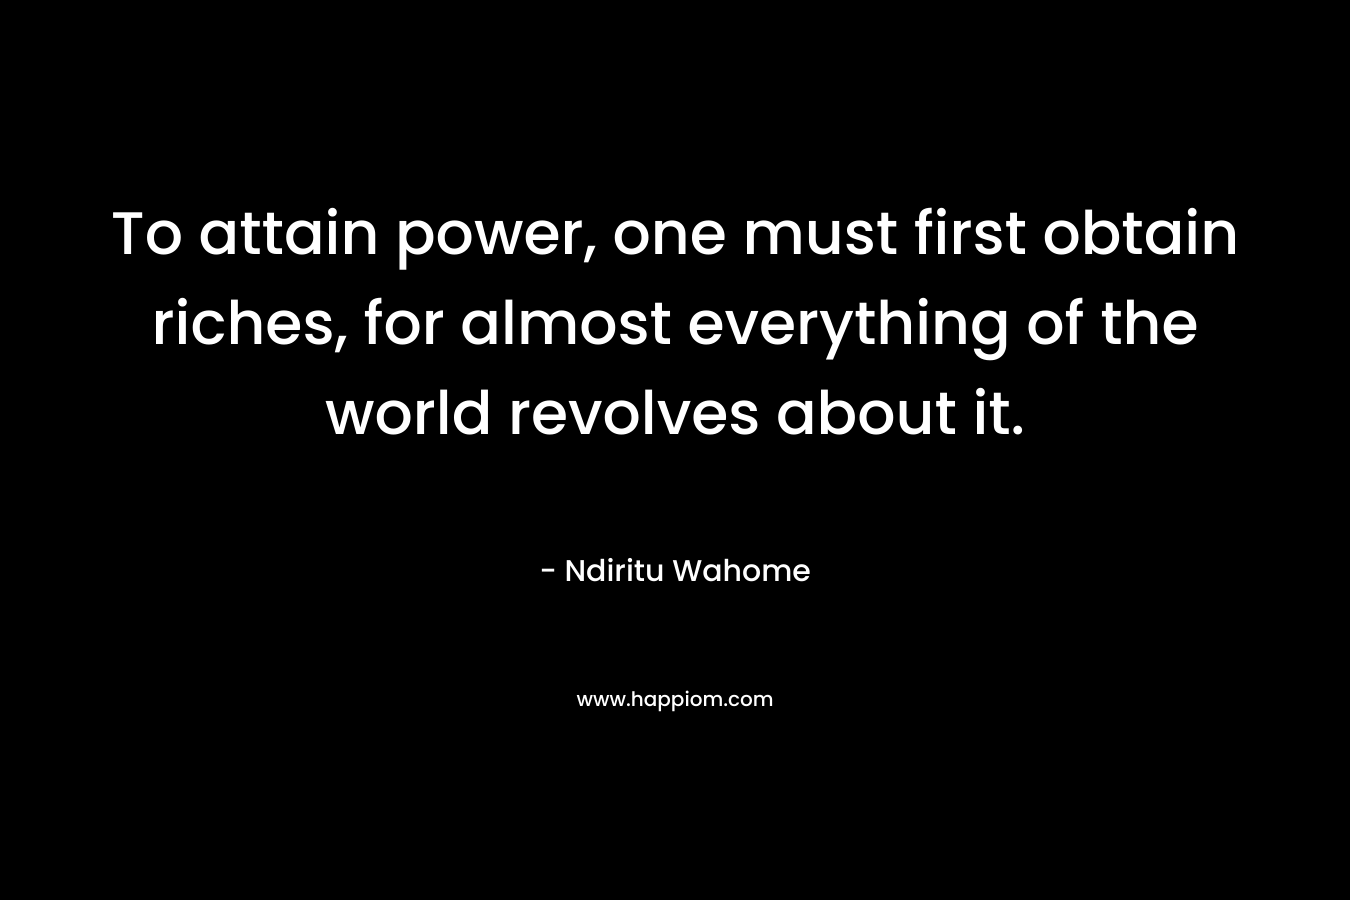 To attain power, one must first obtain riches, for almost everything of the world revolves about it.